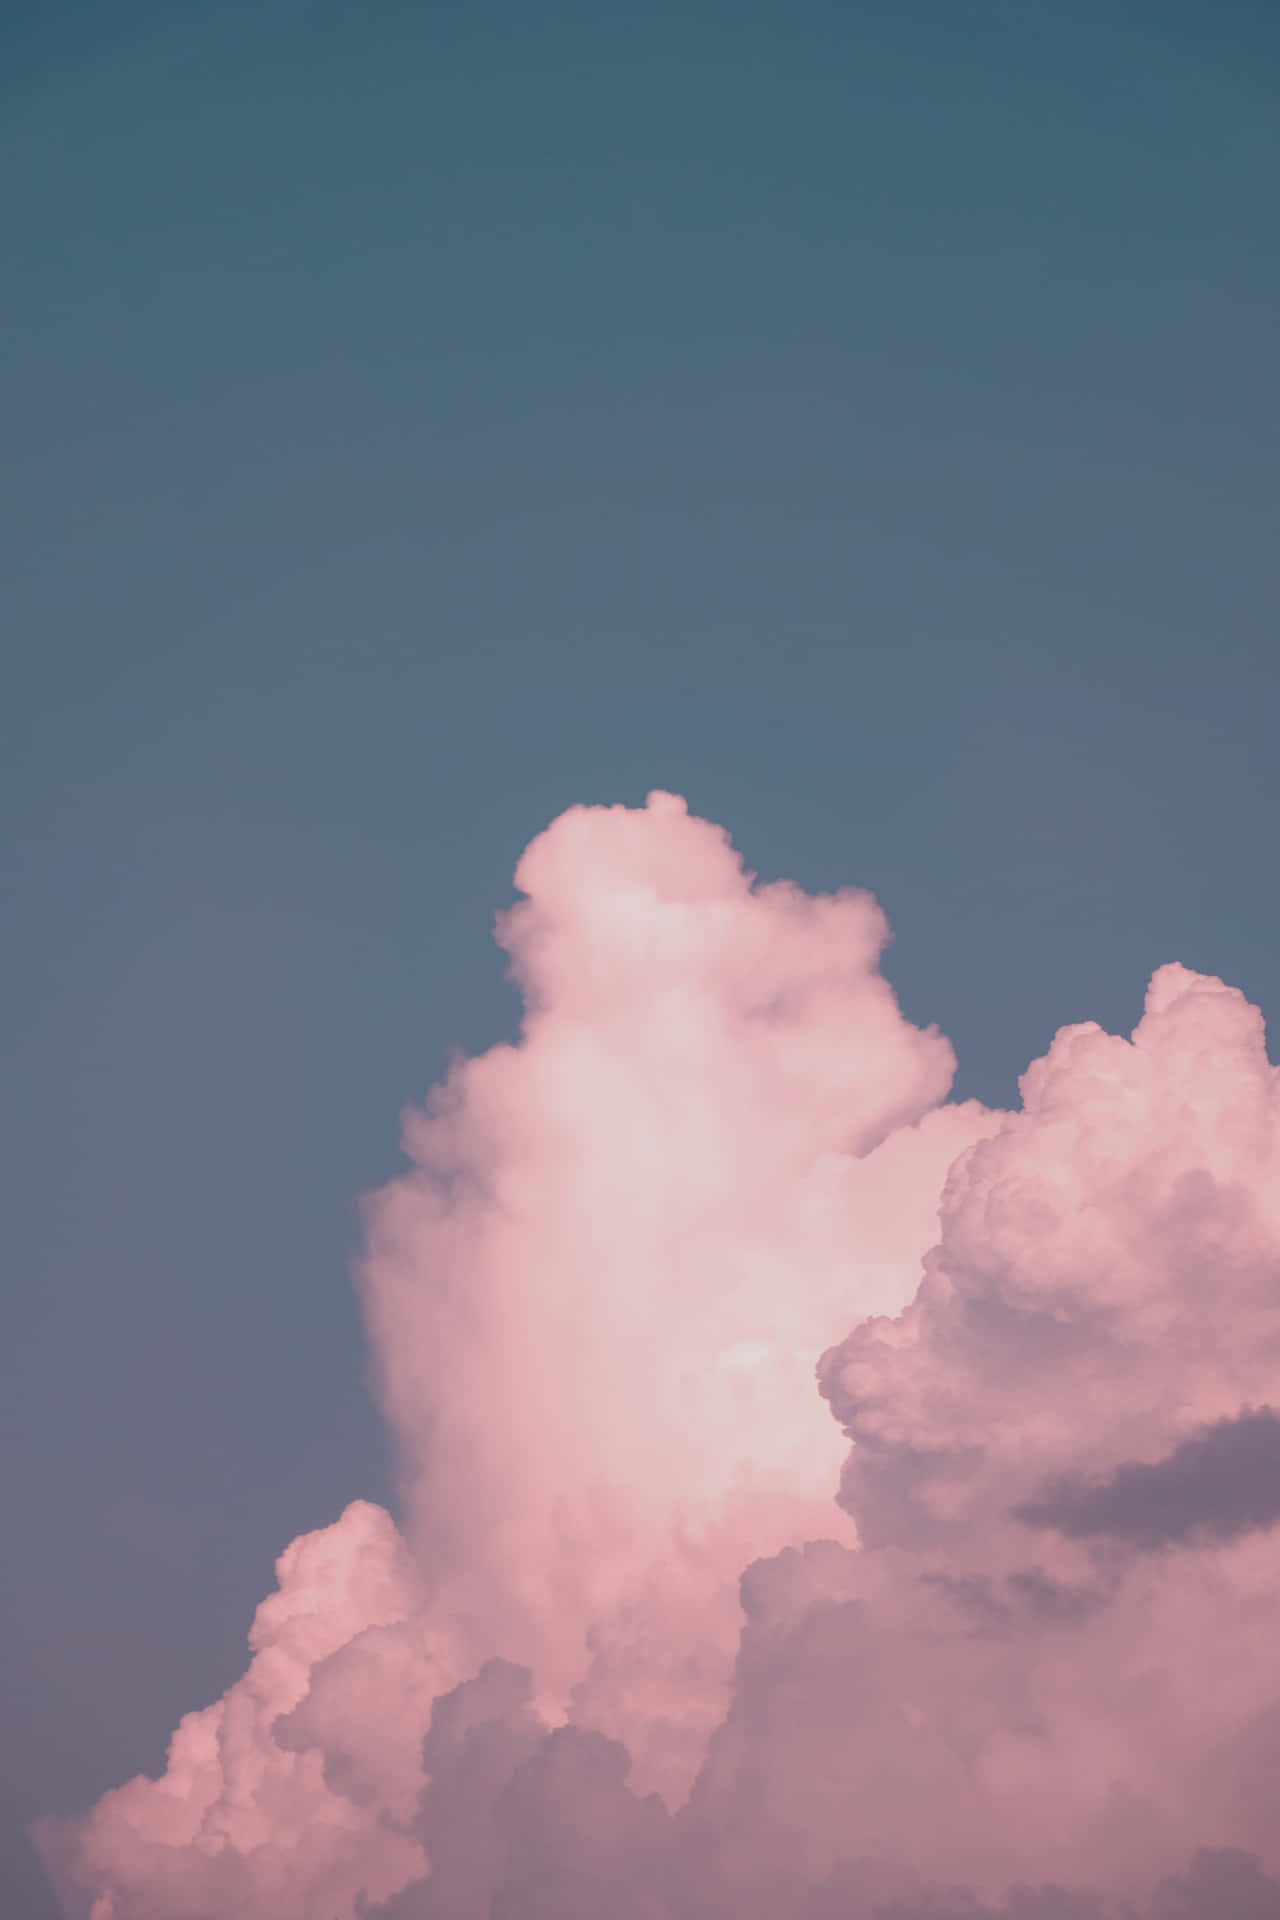 Grunge Aesthetic Pink Clouds Background